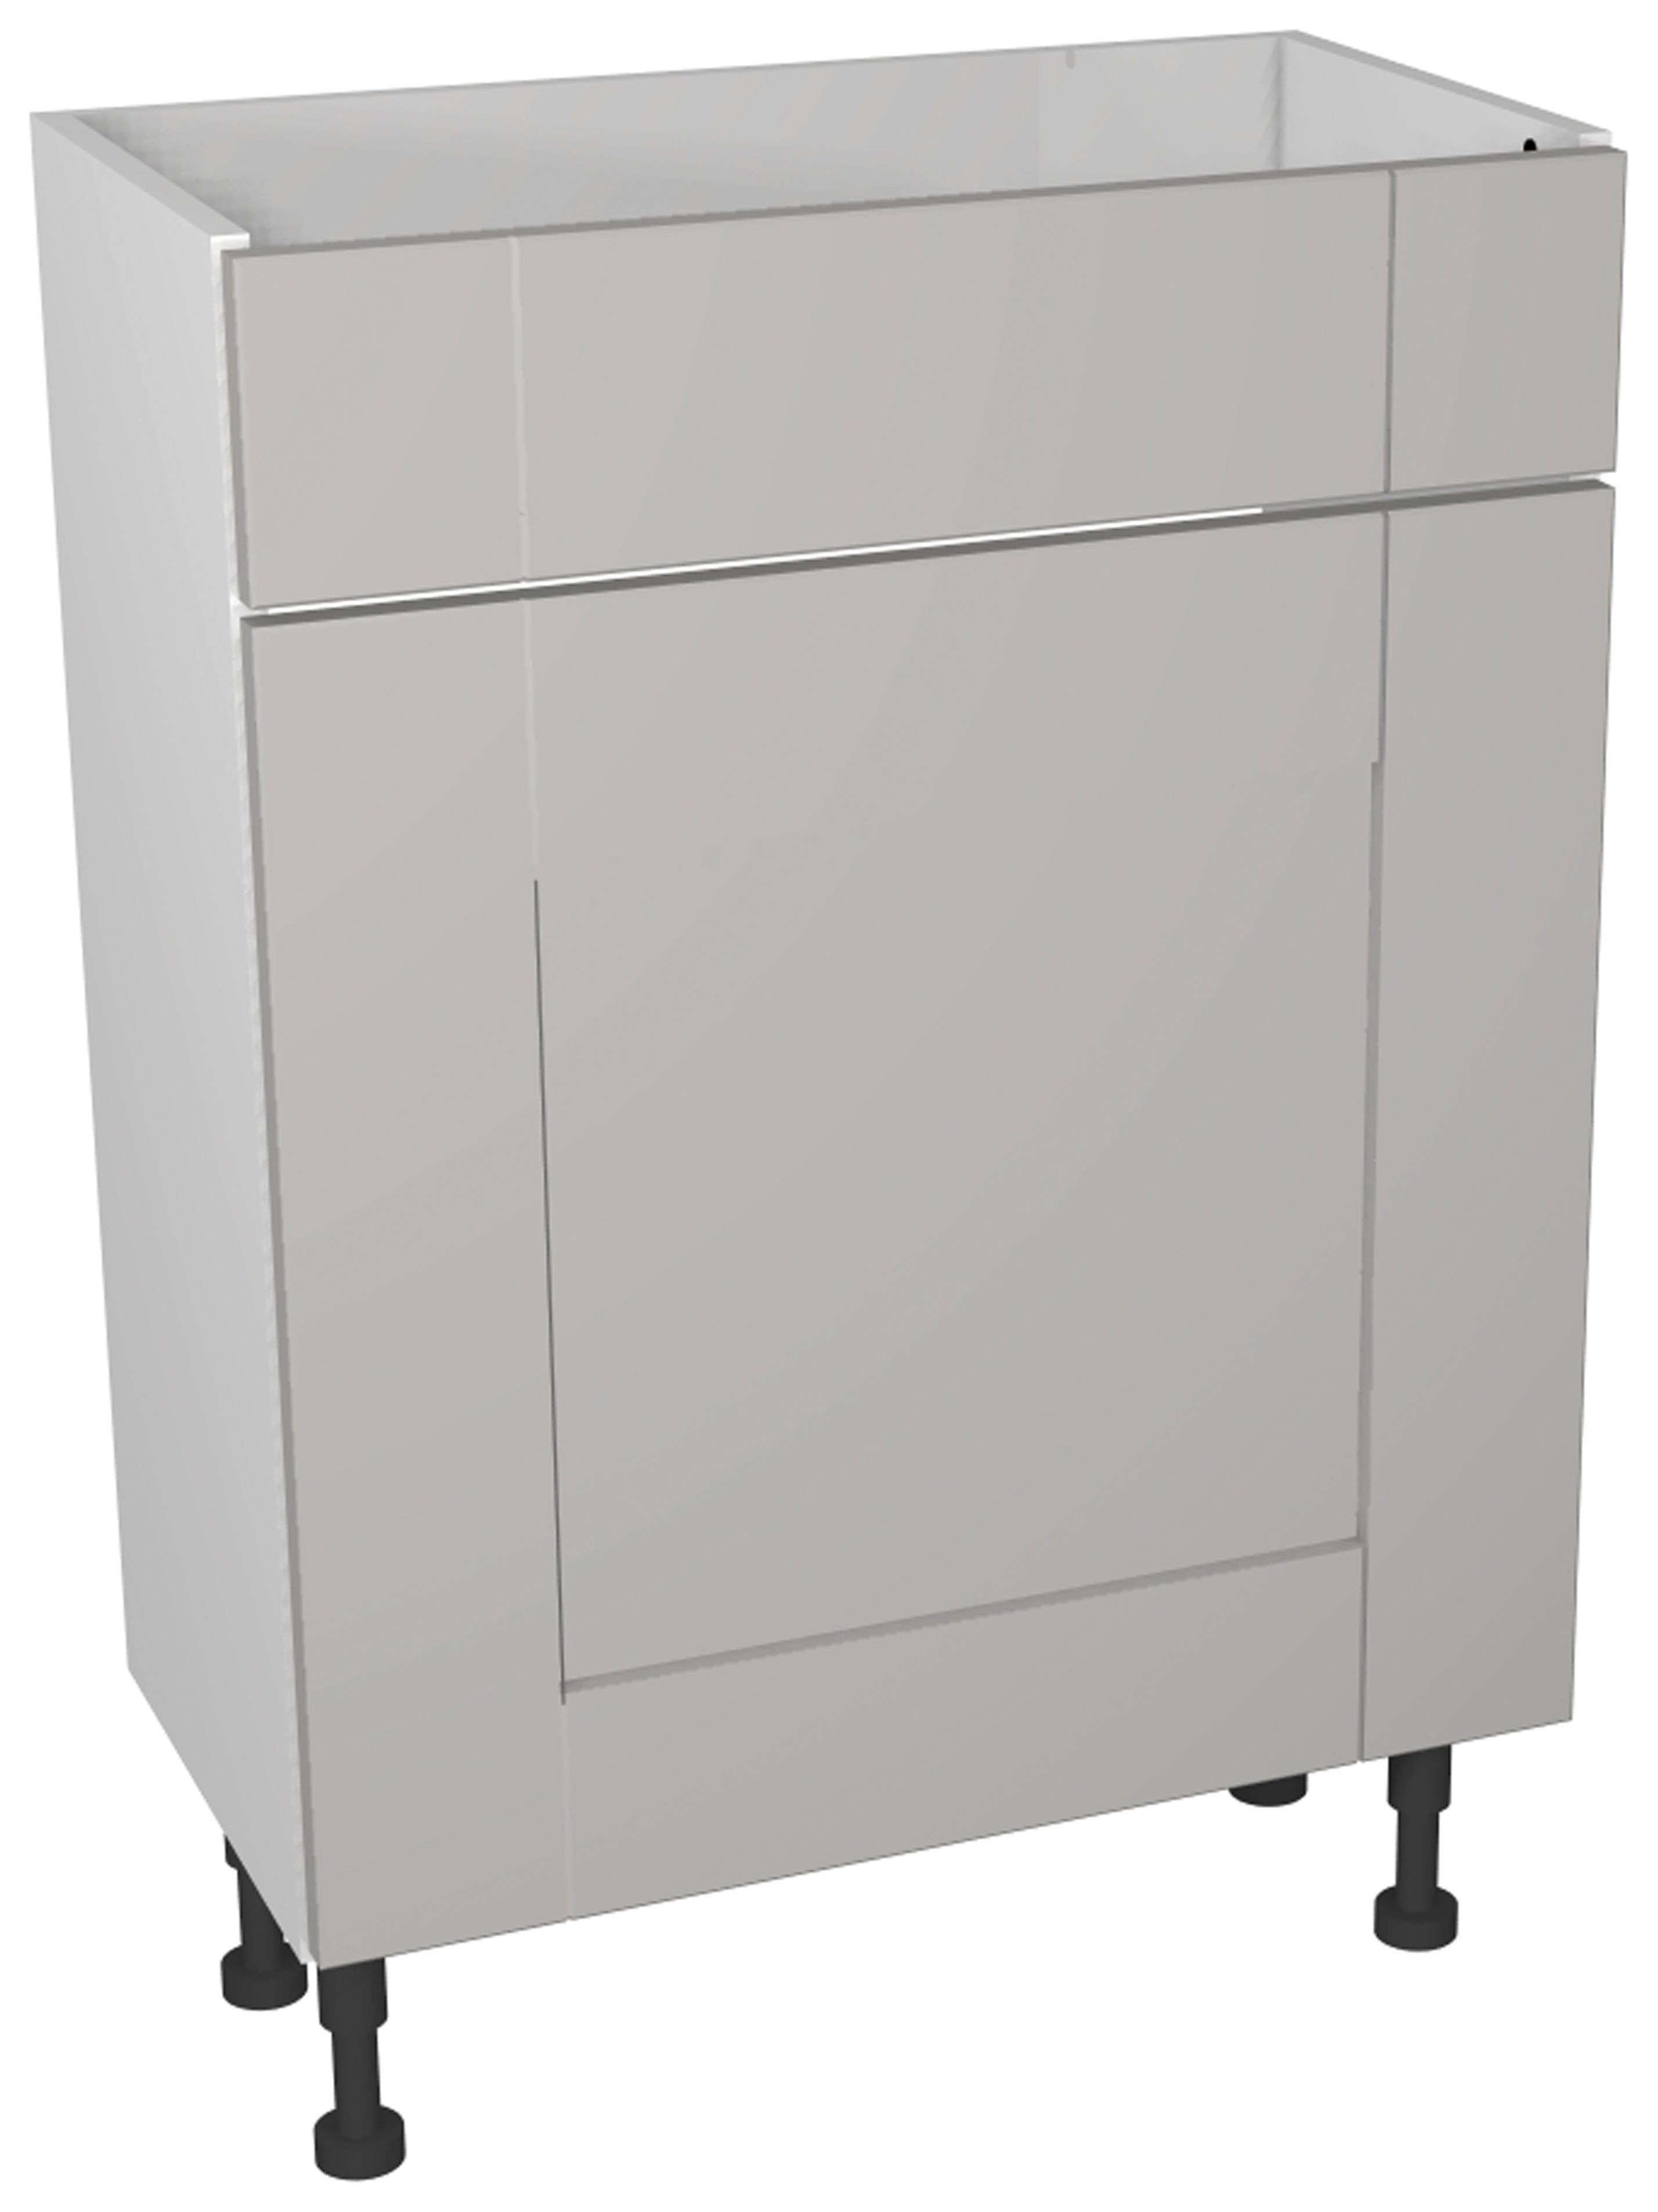 Image of Wickes Vermont Grey WC Unit - 600 x 735mm